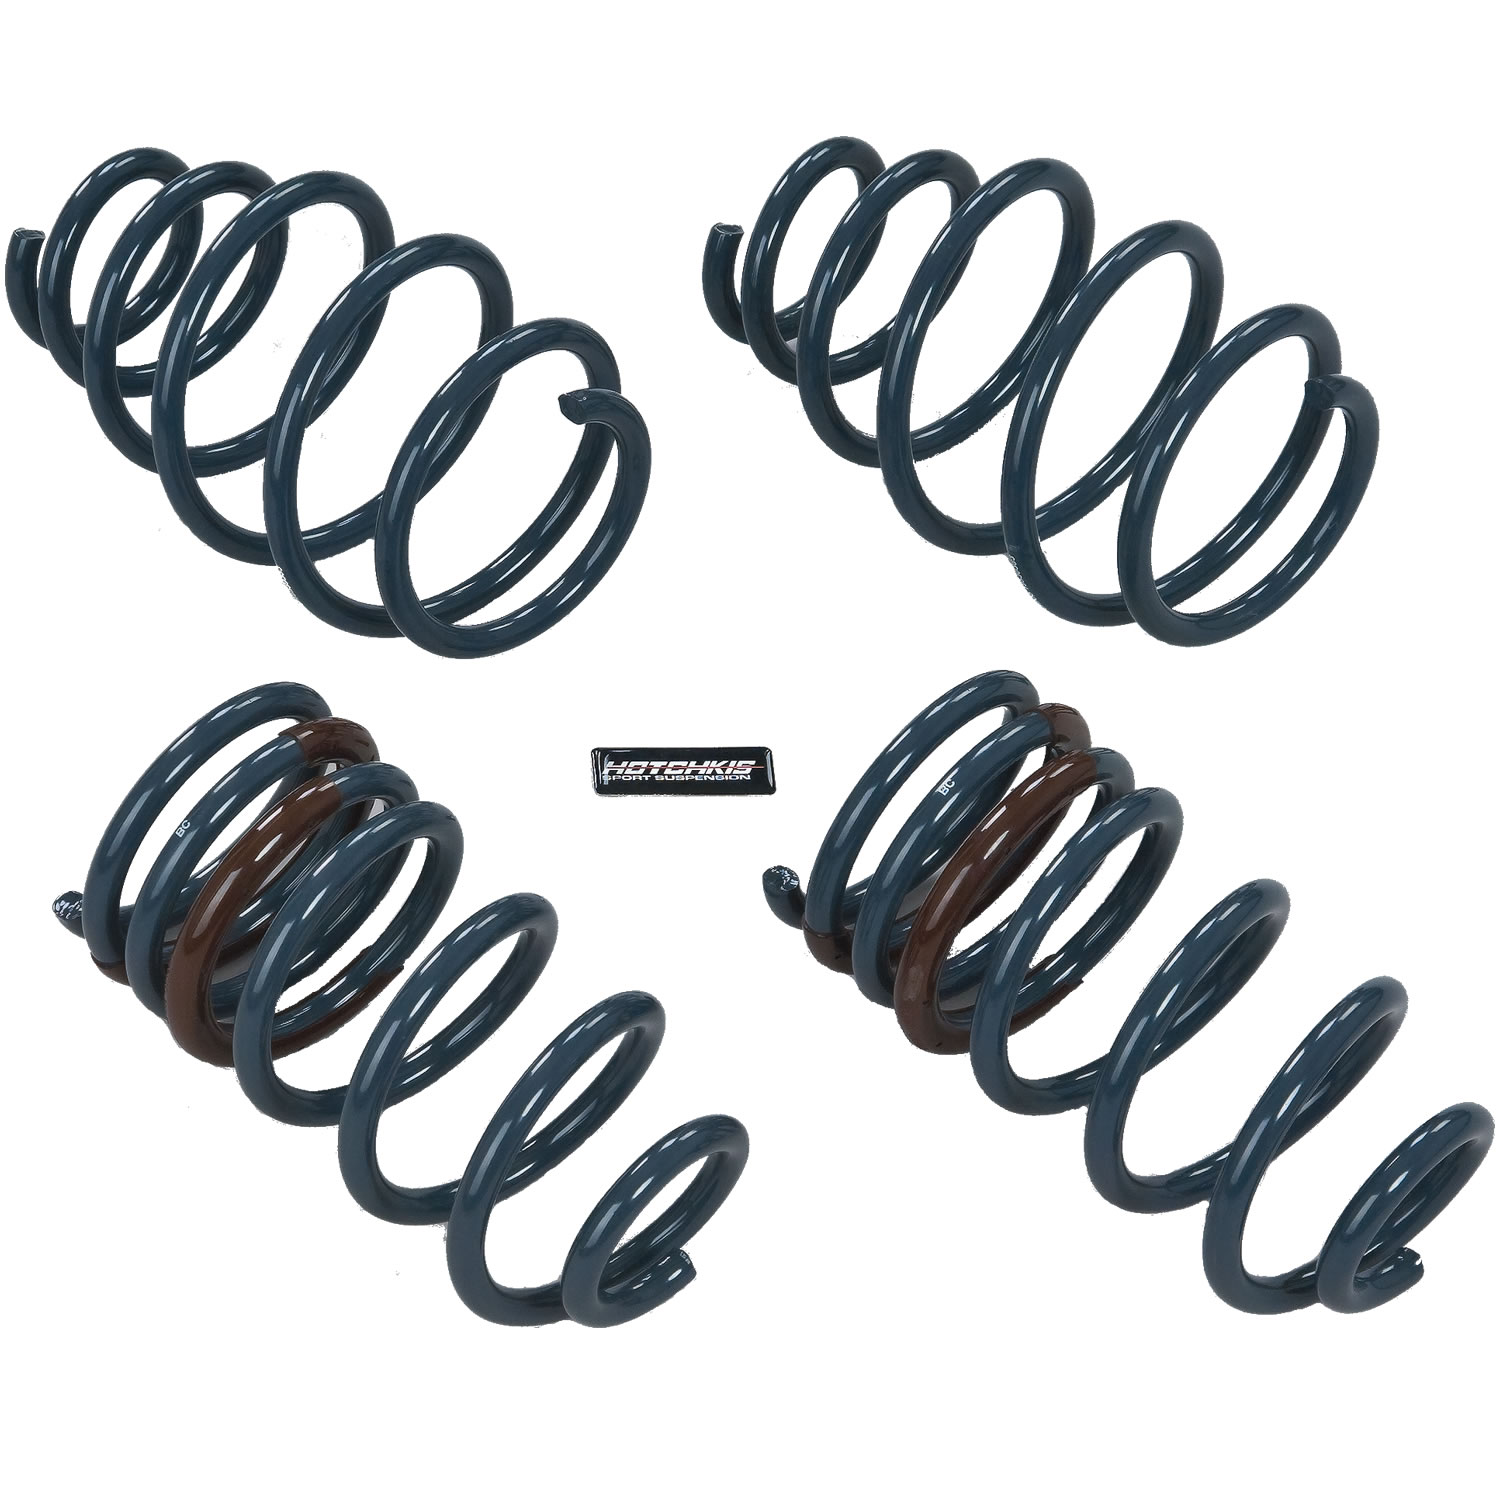 2010-2015 Camaro Sport Coil Springs from Hotchkis Sport Suspension